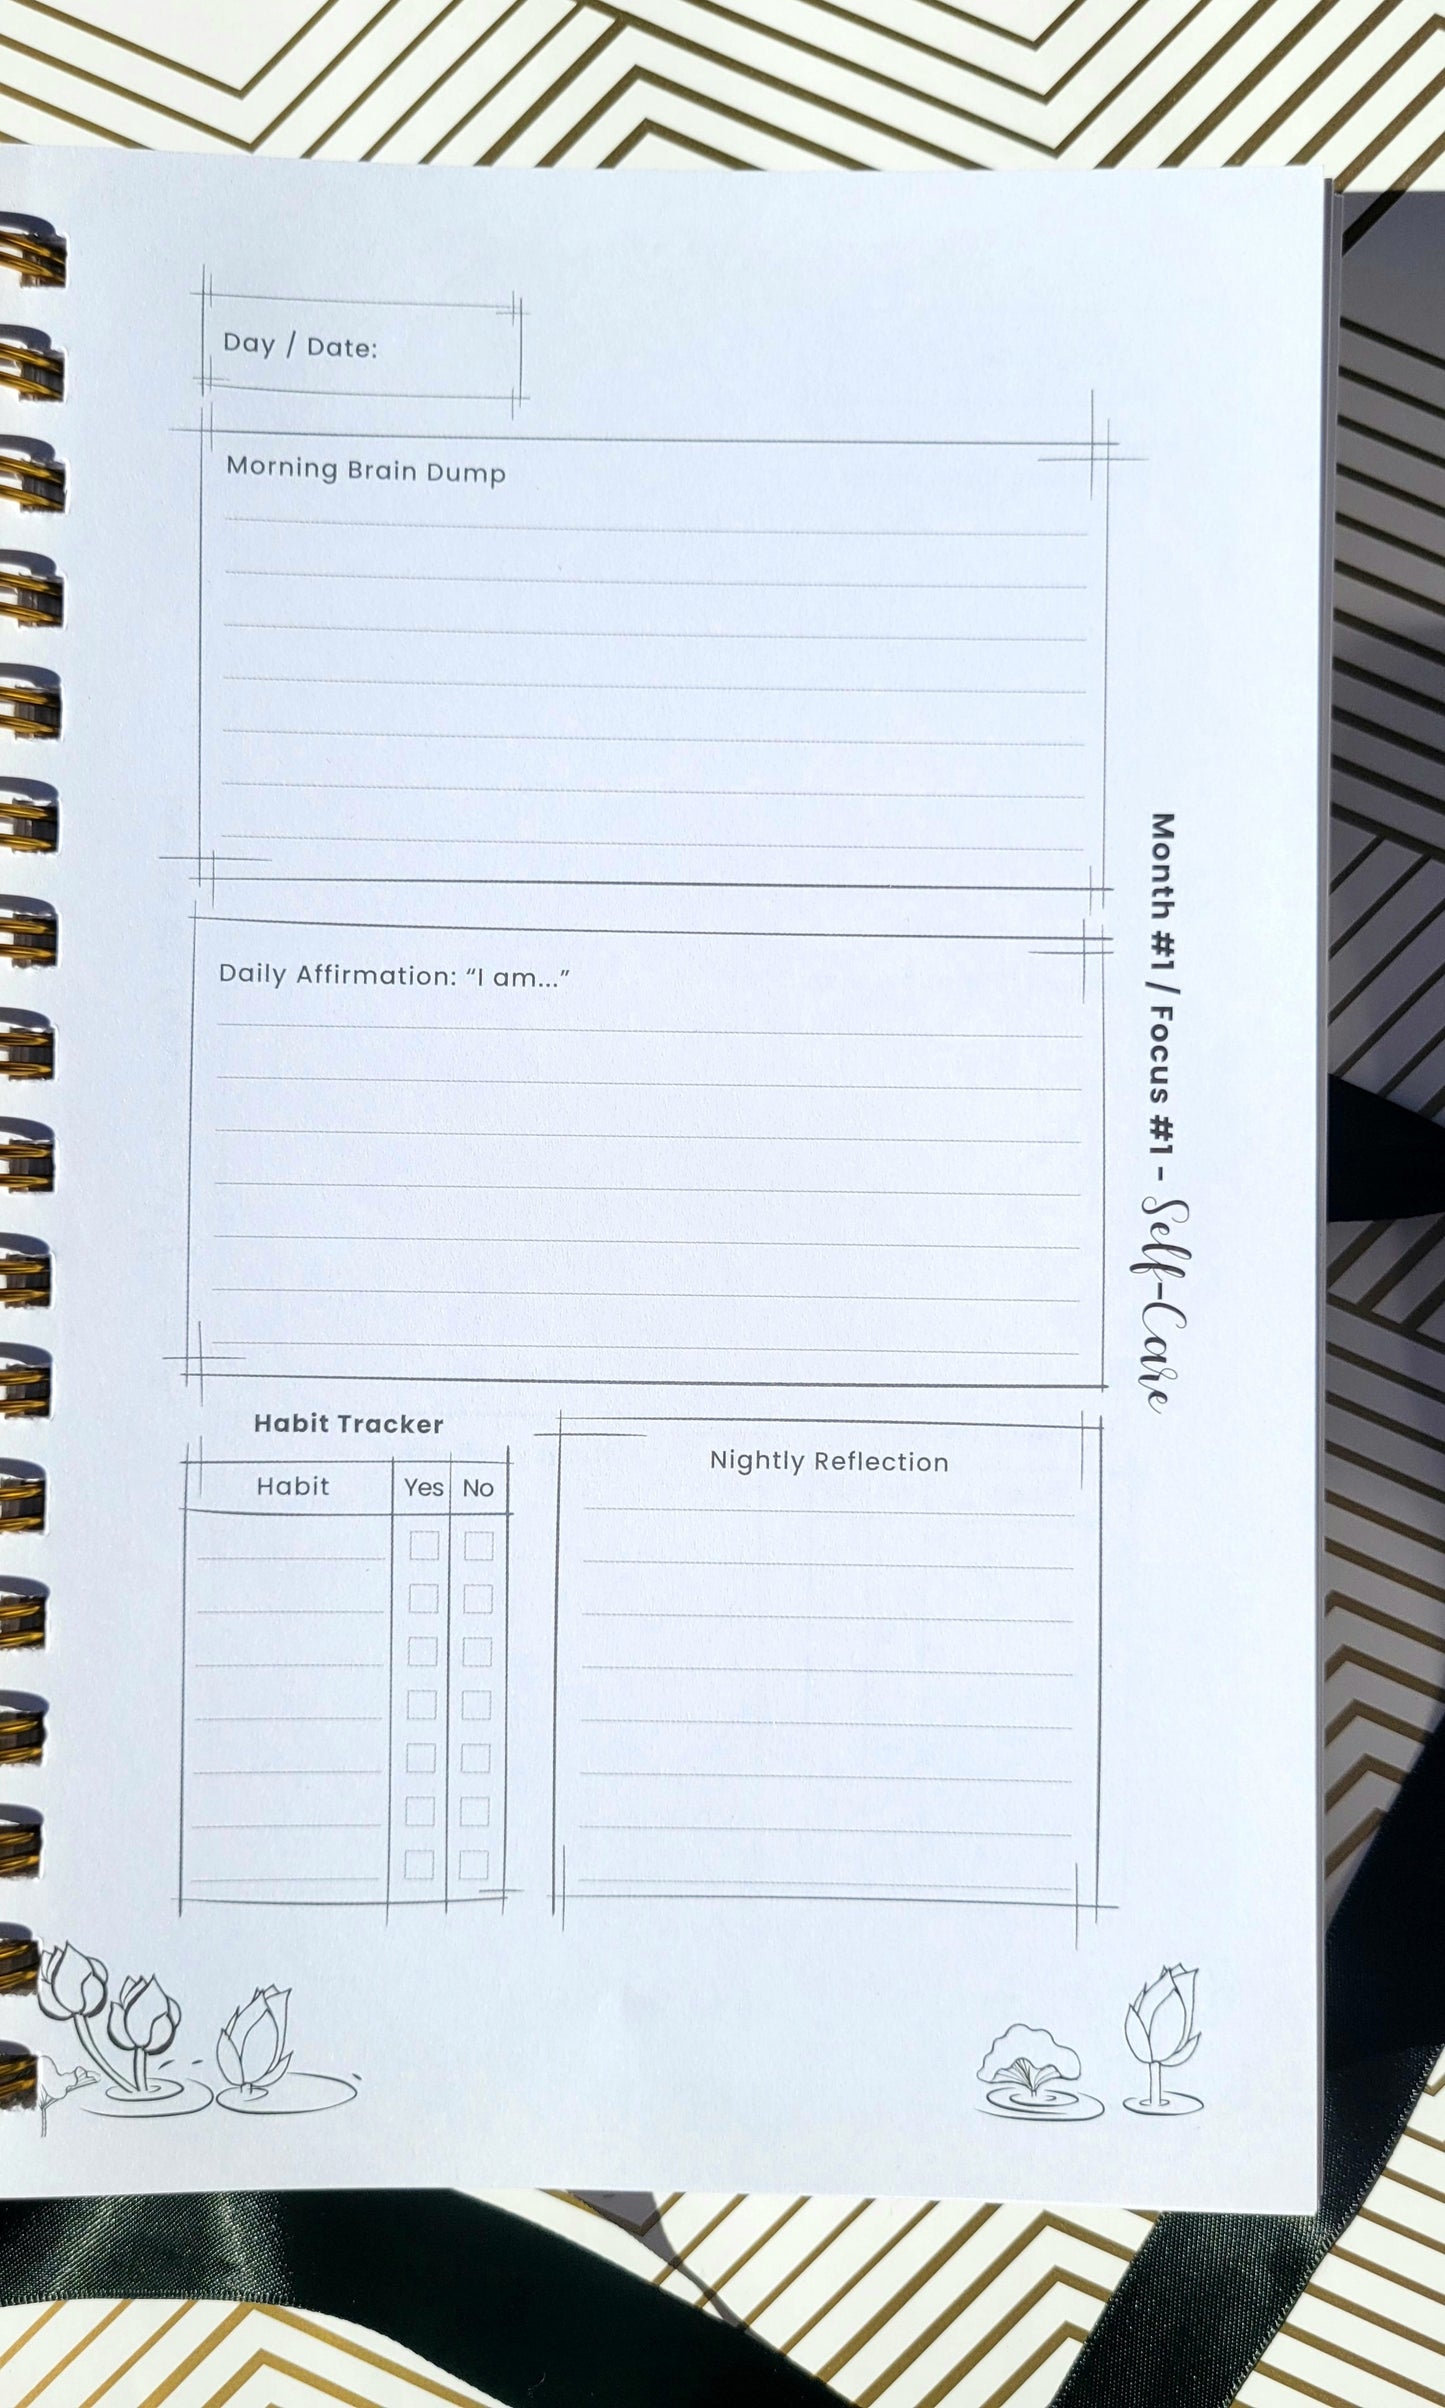 Hardcover Manifestation Guided Journal and Vision Board – Liv 4 You 2